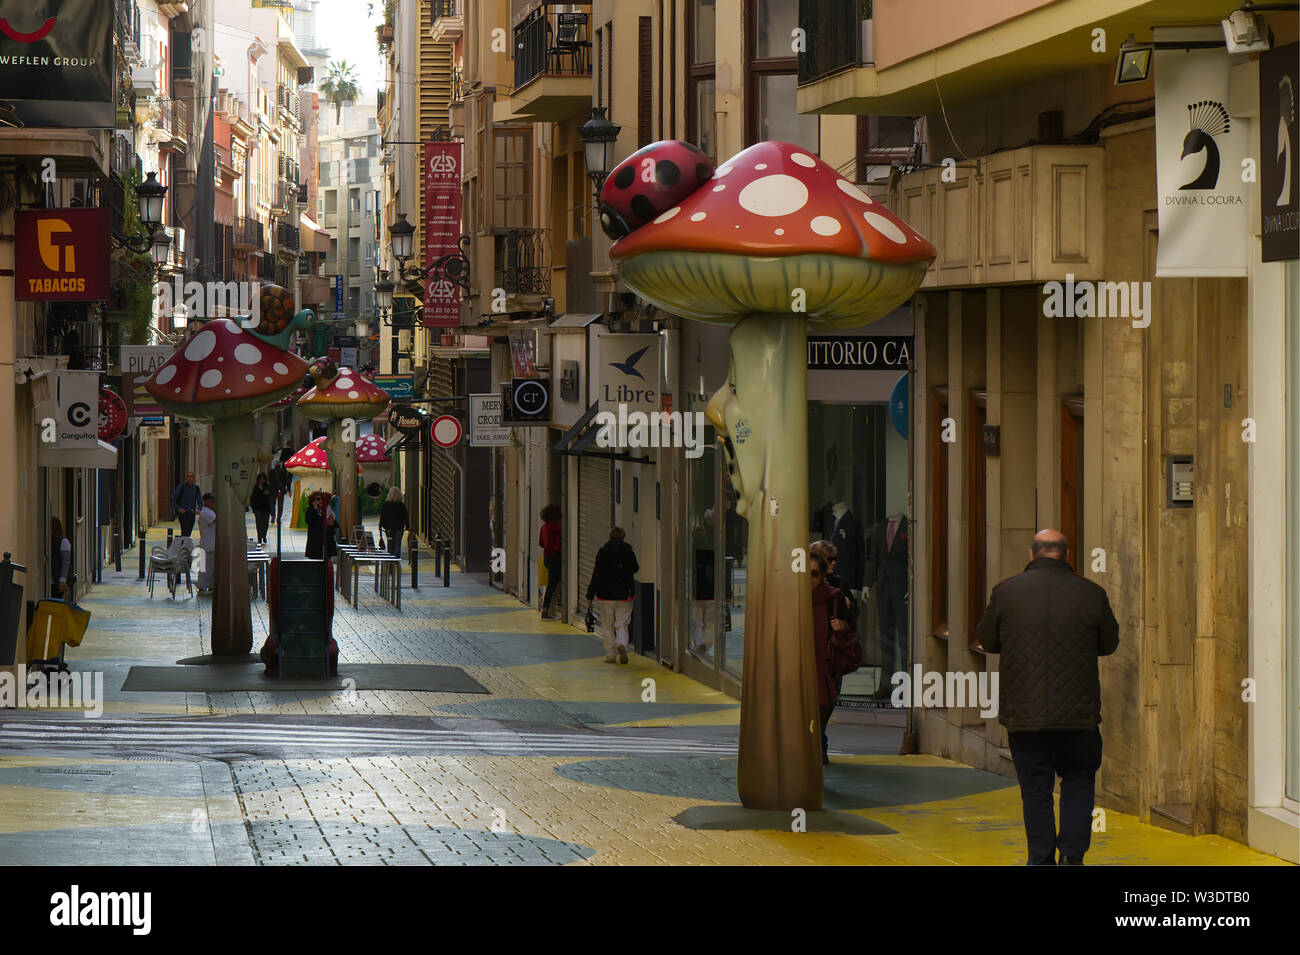 Carrer de Sant Francesc in Alicante, Spain. City street with unusual sculptures of mushrooms and fungi with insects. Stock Photo